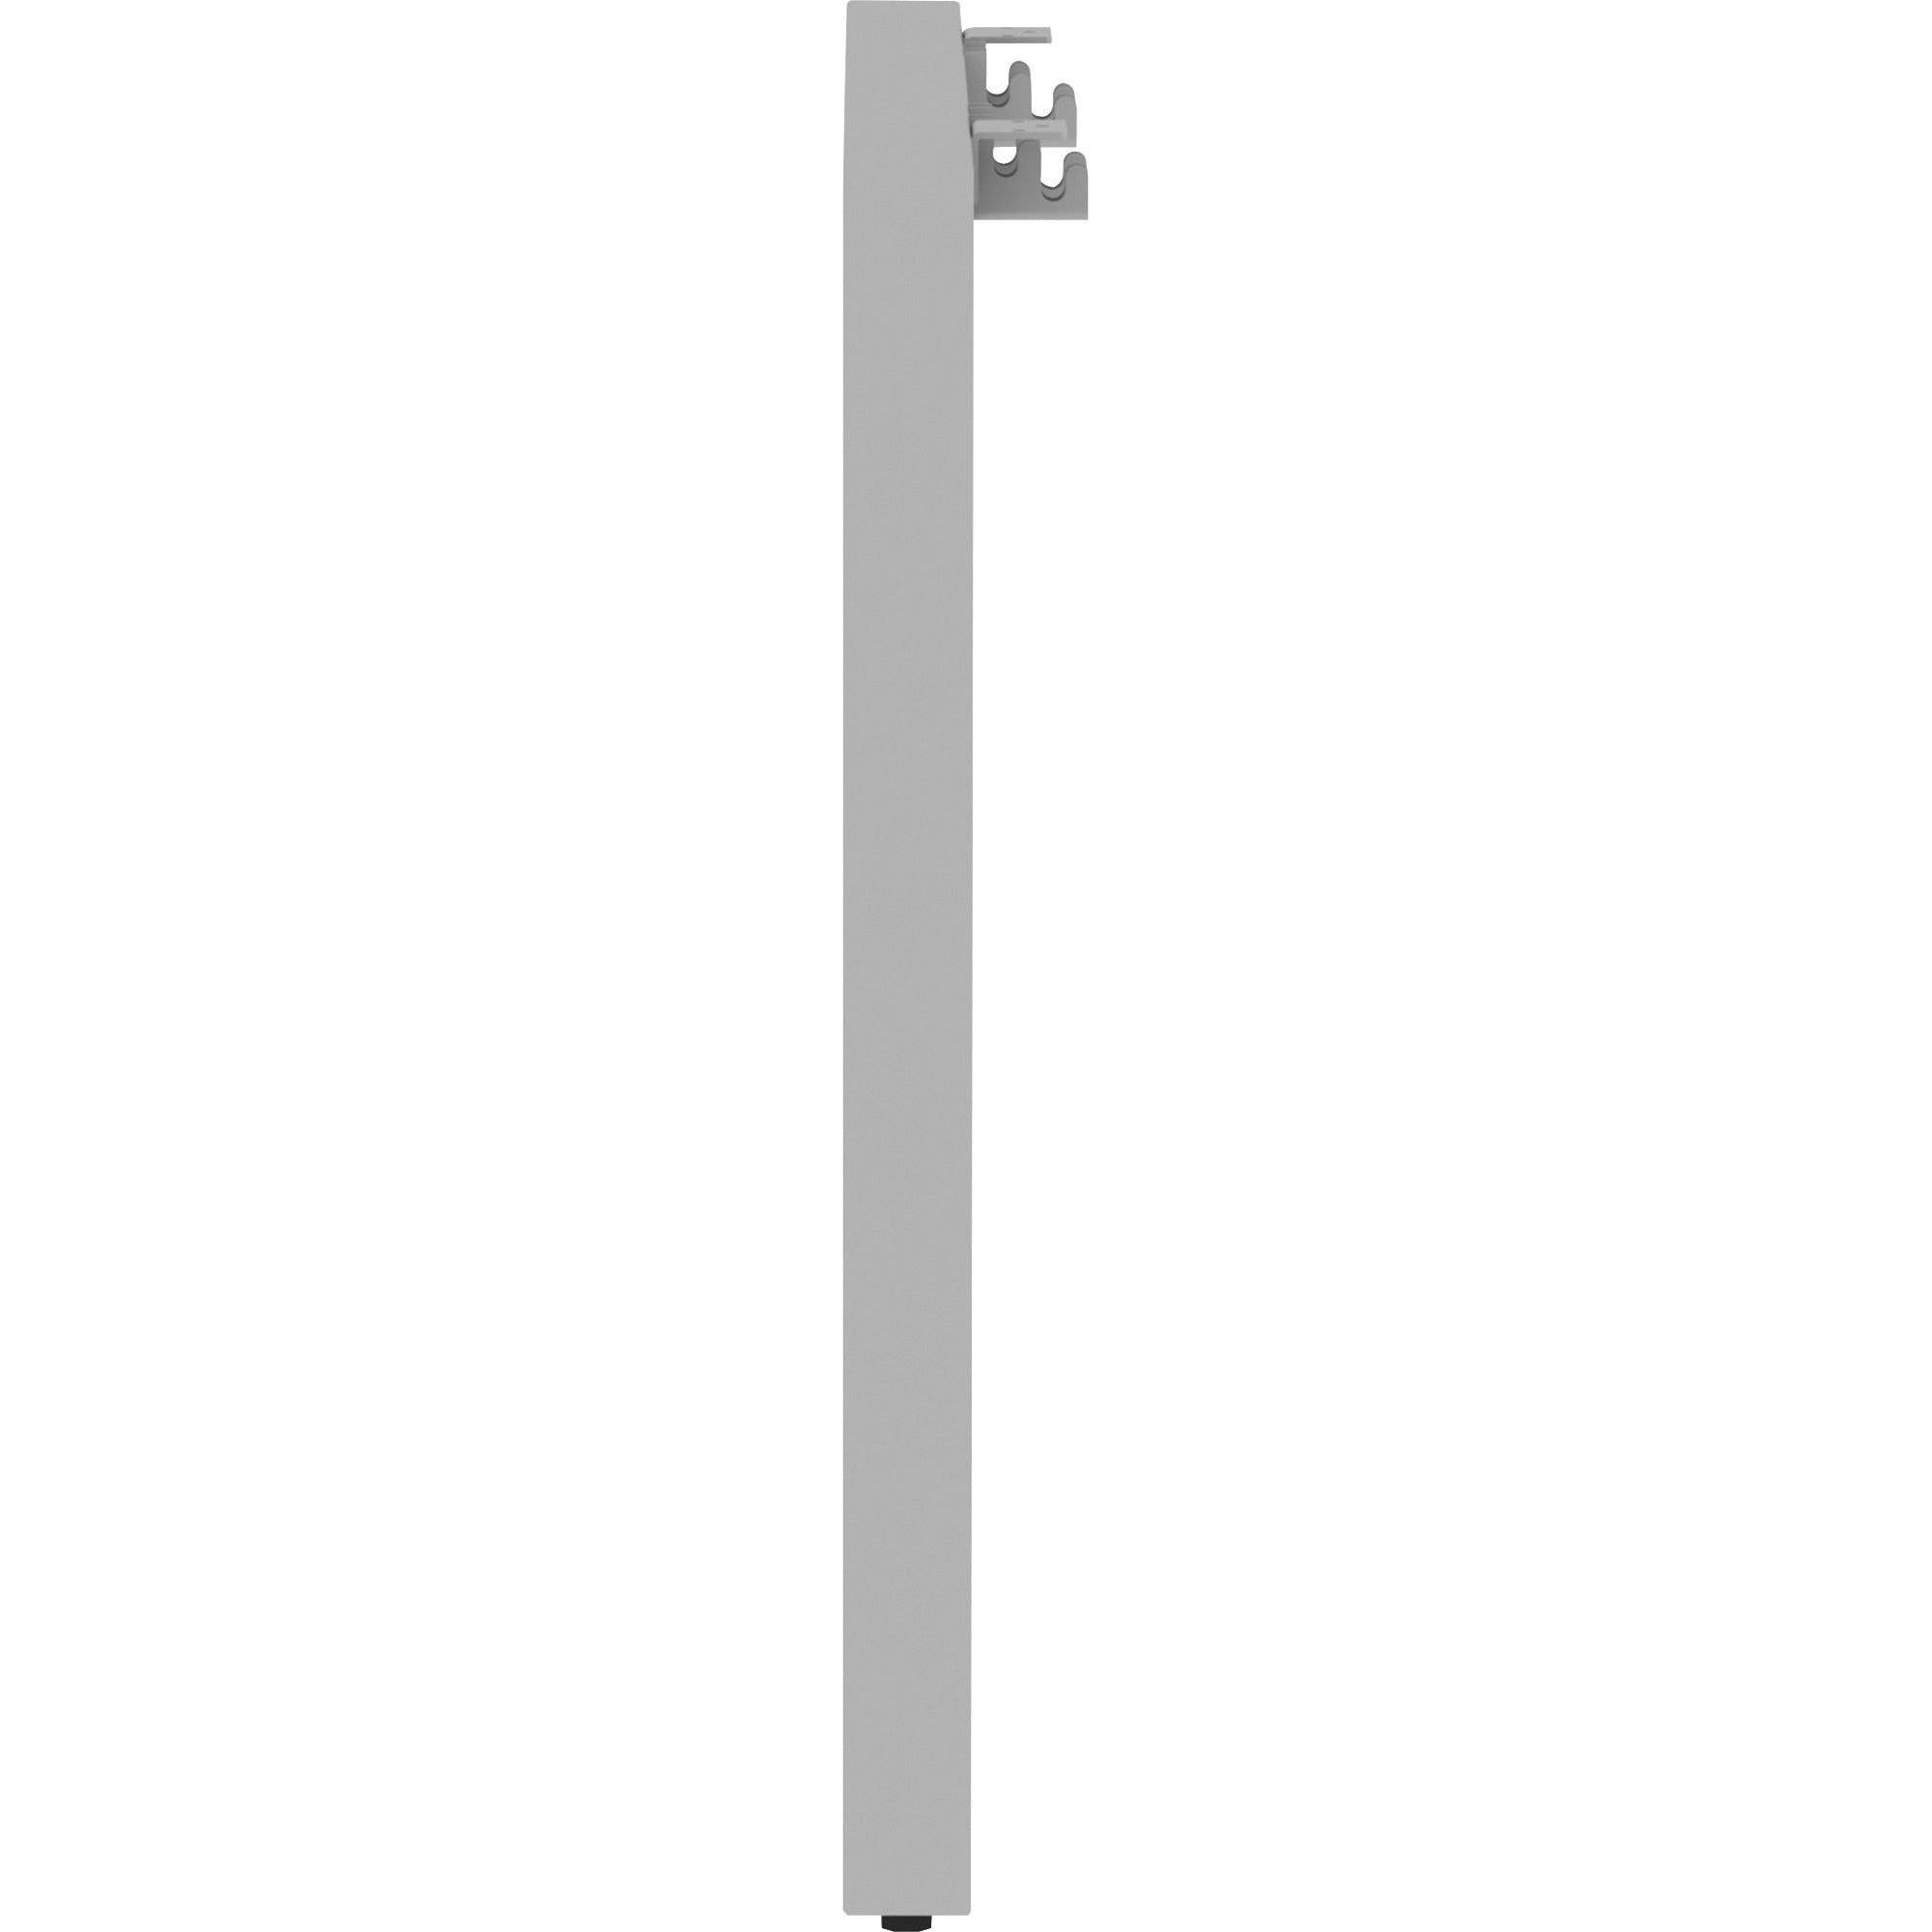 lorell-relevance-series-wide-side-leg-455-x-4285-finish-silver-powder-coated_llr16251 - 4